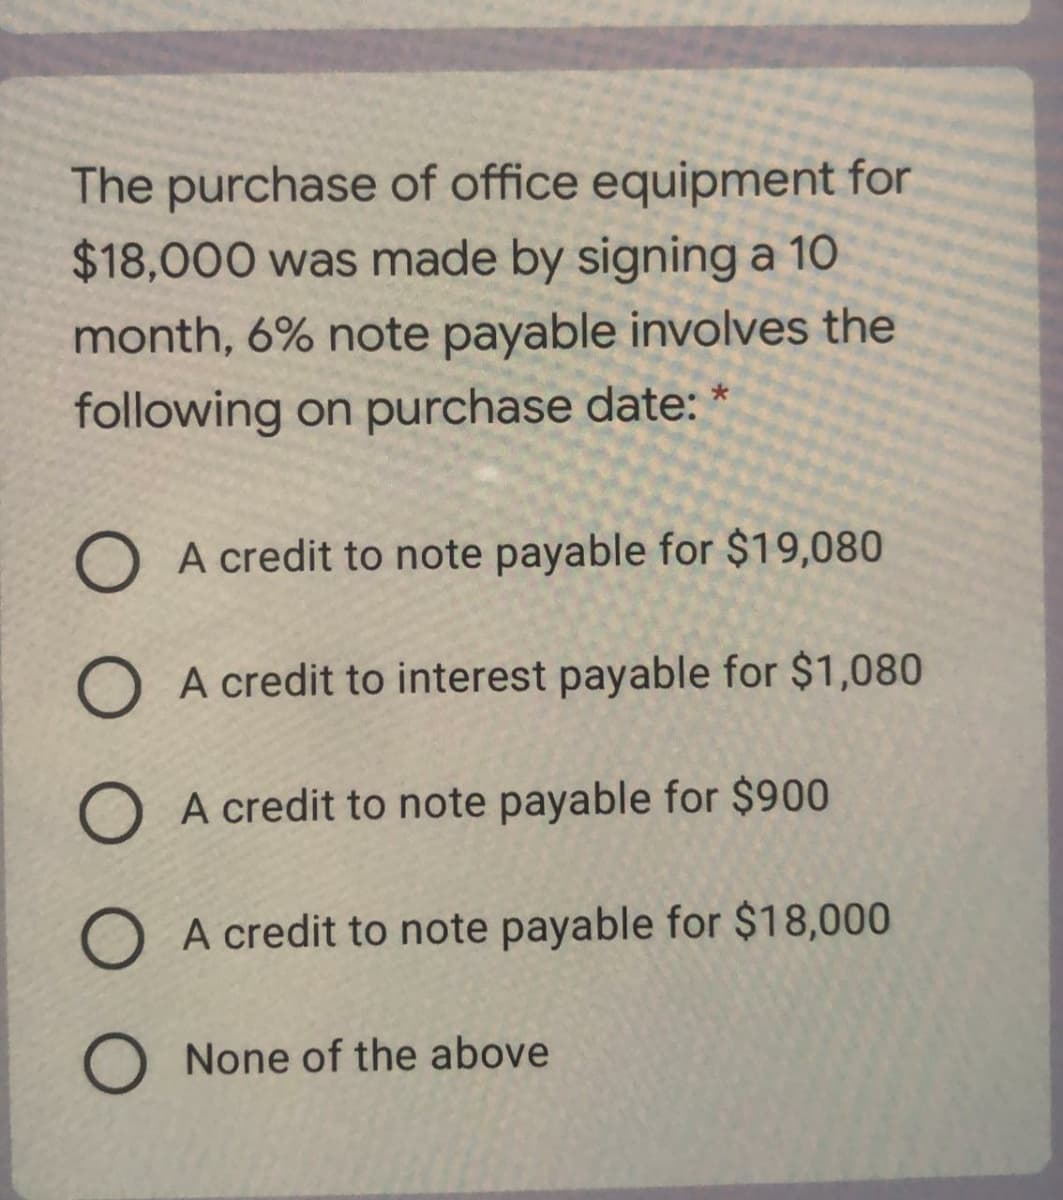 The purchase of office equipment for
$18,000 was made by signing a 10
month, 6% note payable involves the
following on purchase date: *
O A credit to note payable for $19,080
O A credit to interest payable for $1,080
O A credit to note payable for $900
O A credit to note payable for $18,000
O None of the above
